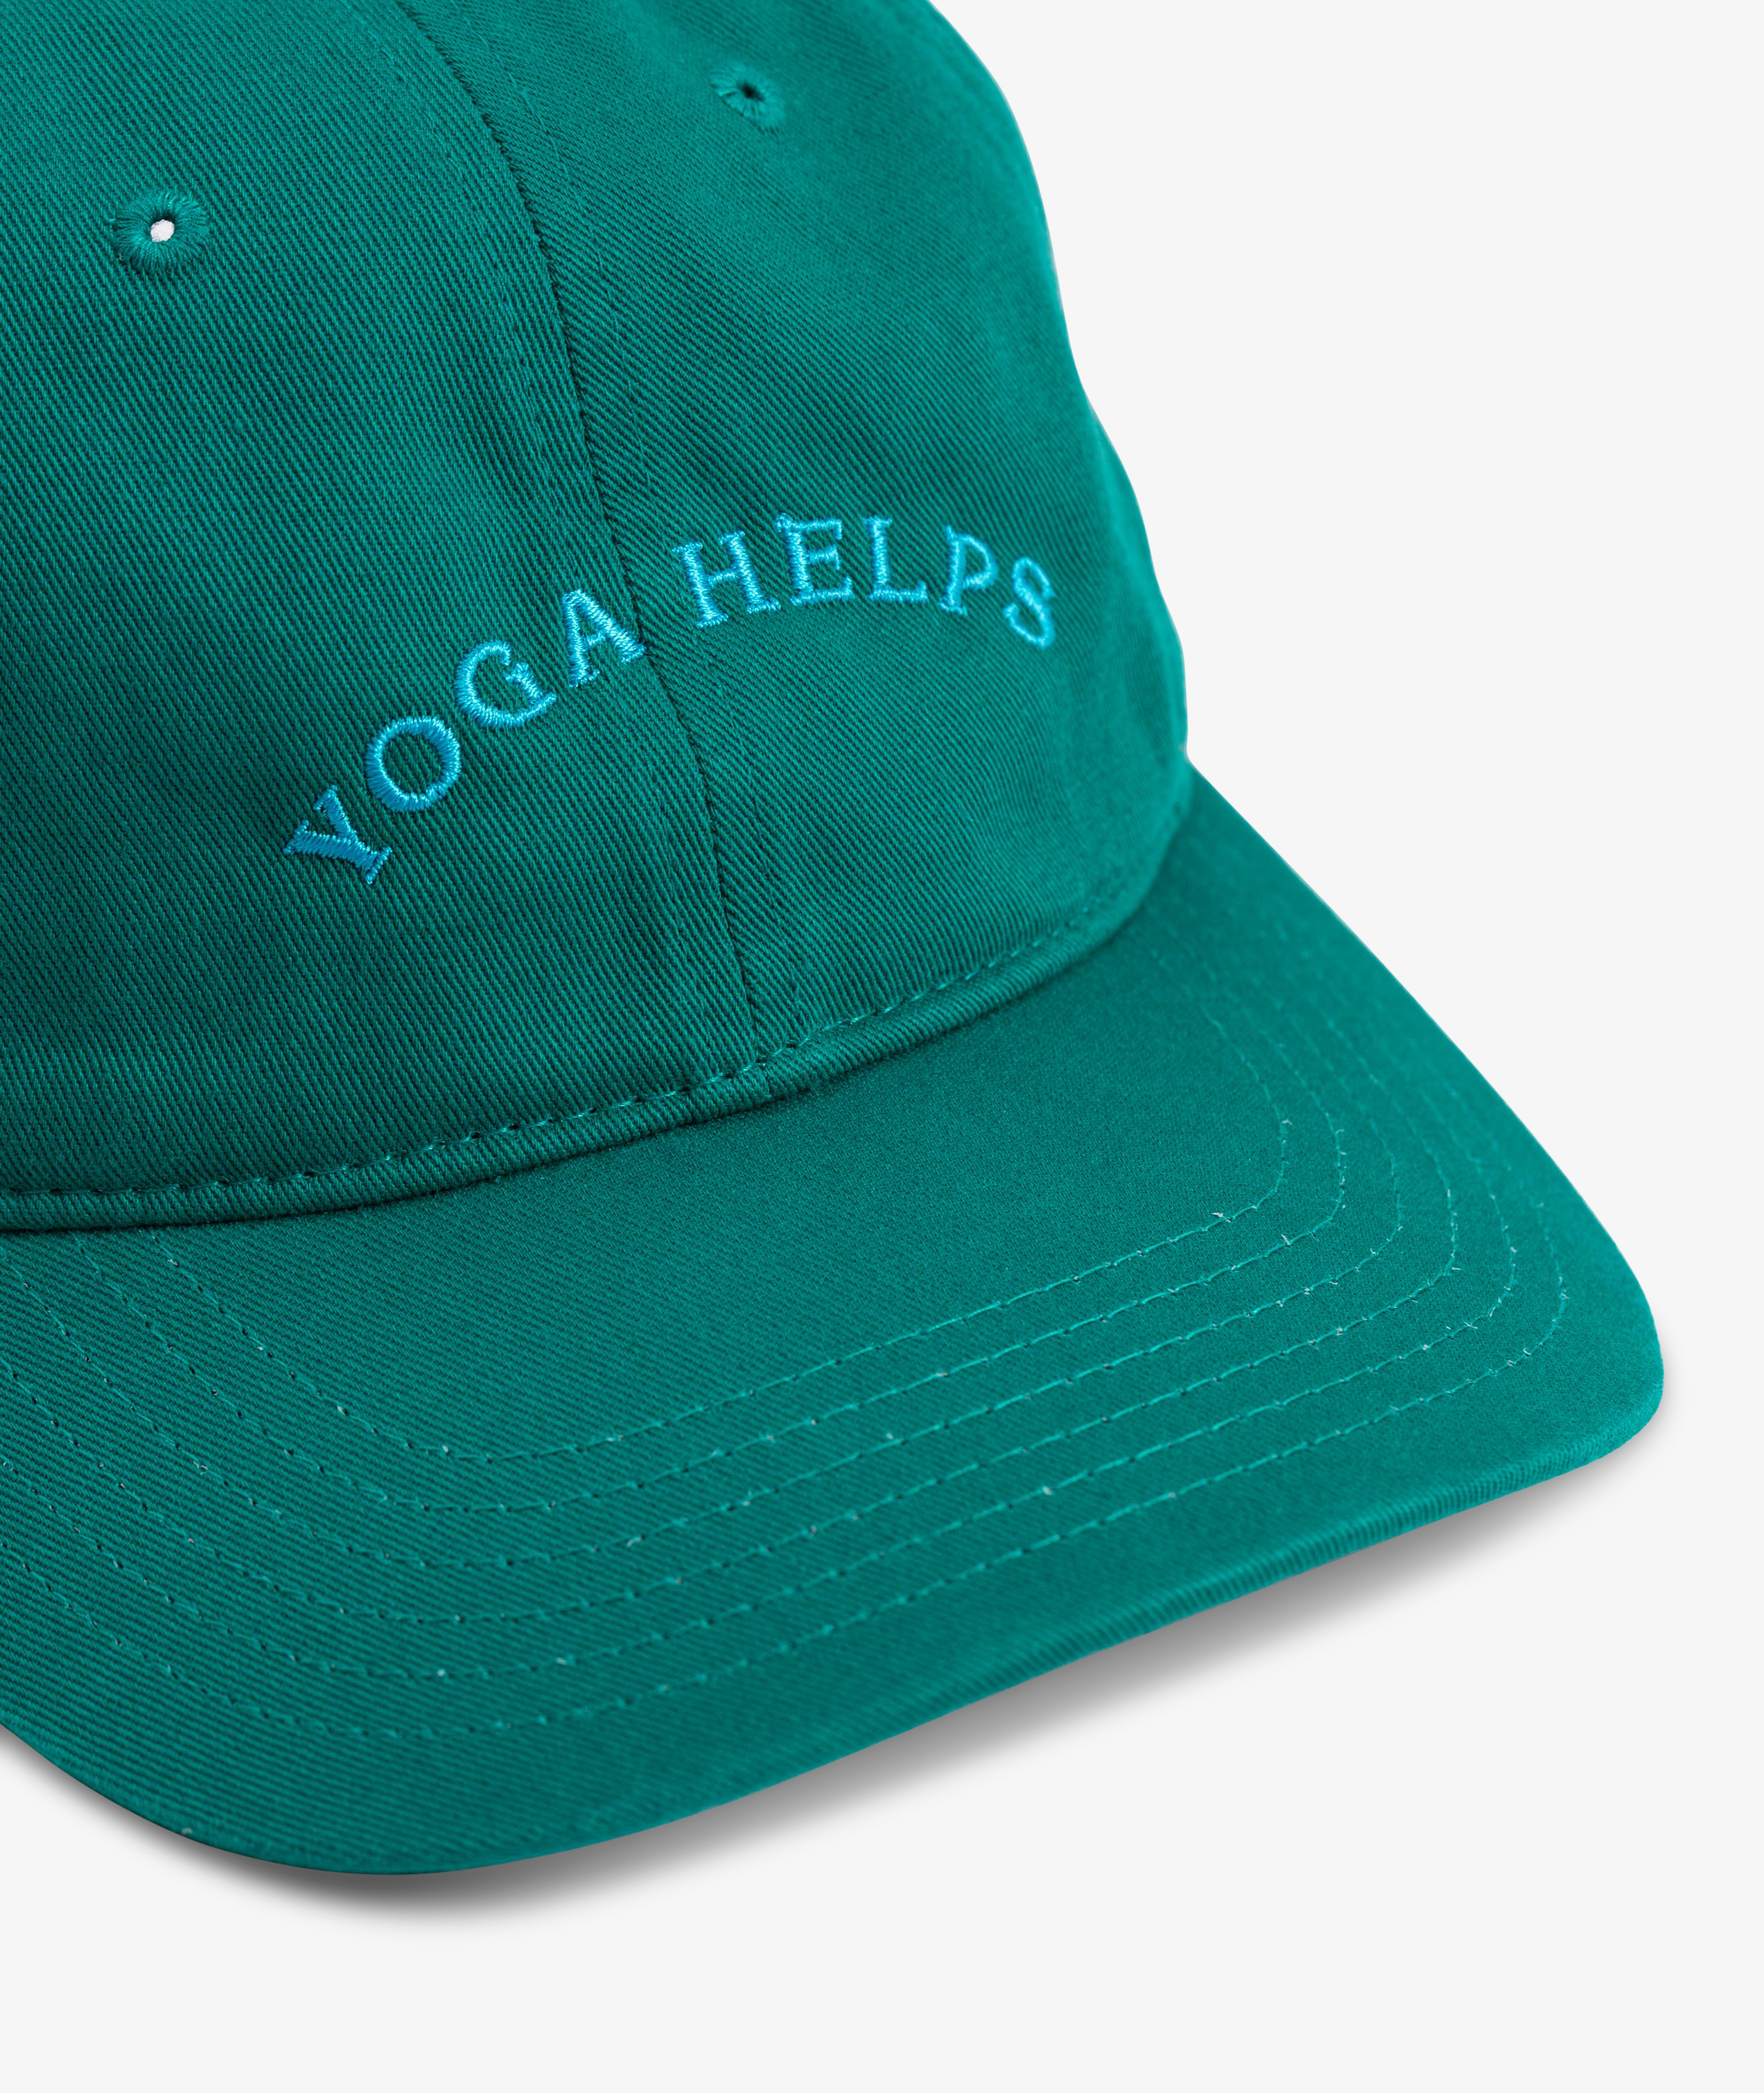 Norse Store | Shipping Worldwide - IDEA Yoga Helps Cap - Turkis